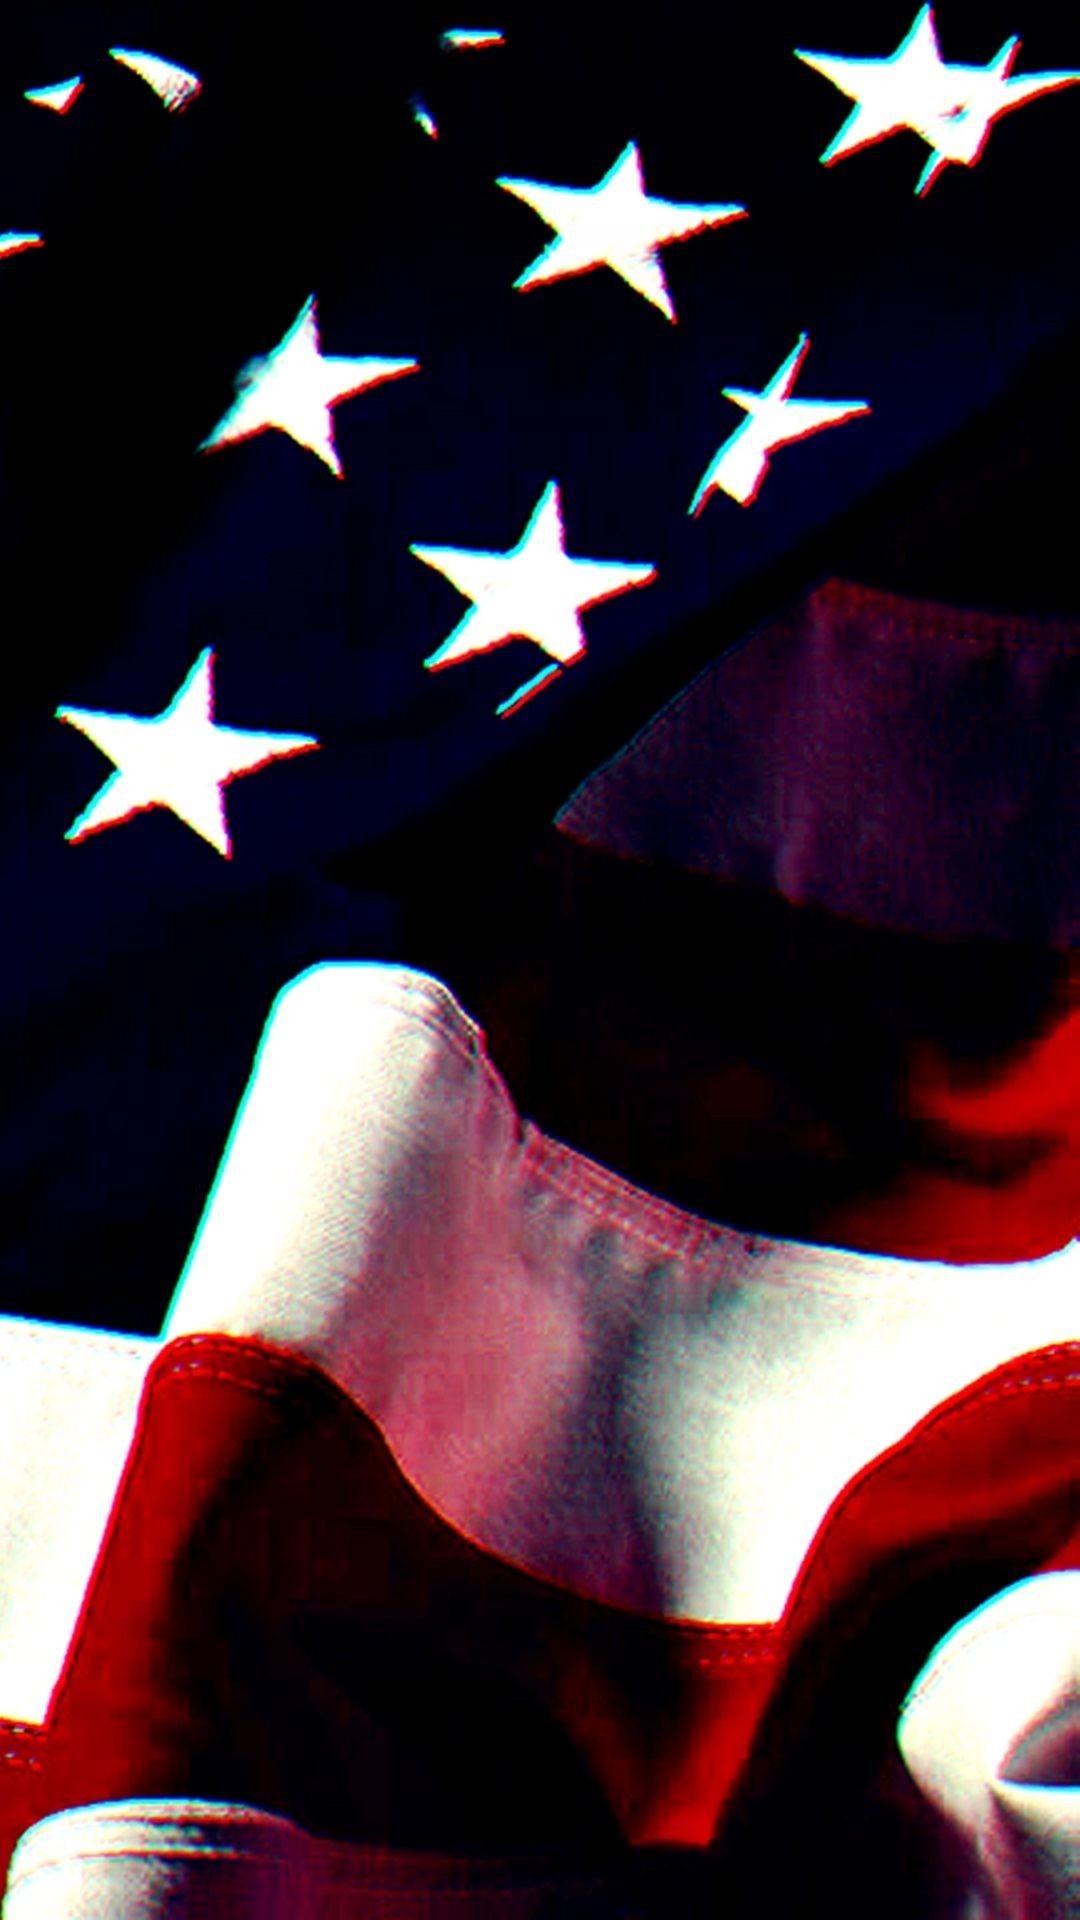 1080x1920 Wallpaper iphone usa - Free Download American Flag Iphone Background.  Download